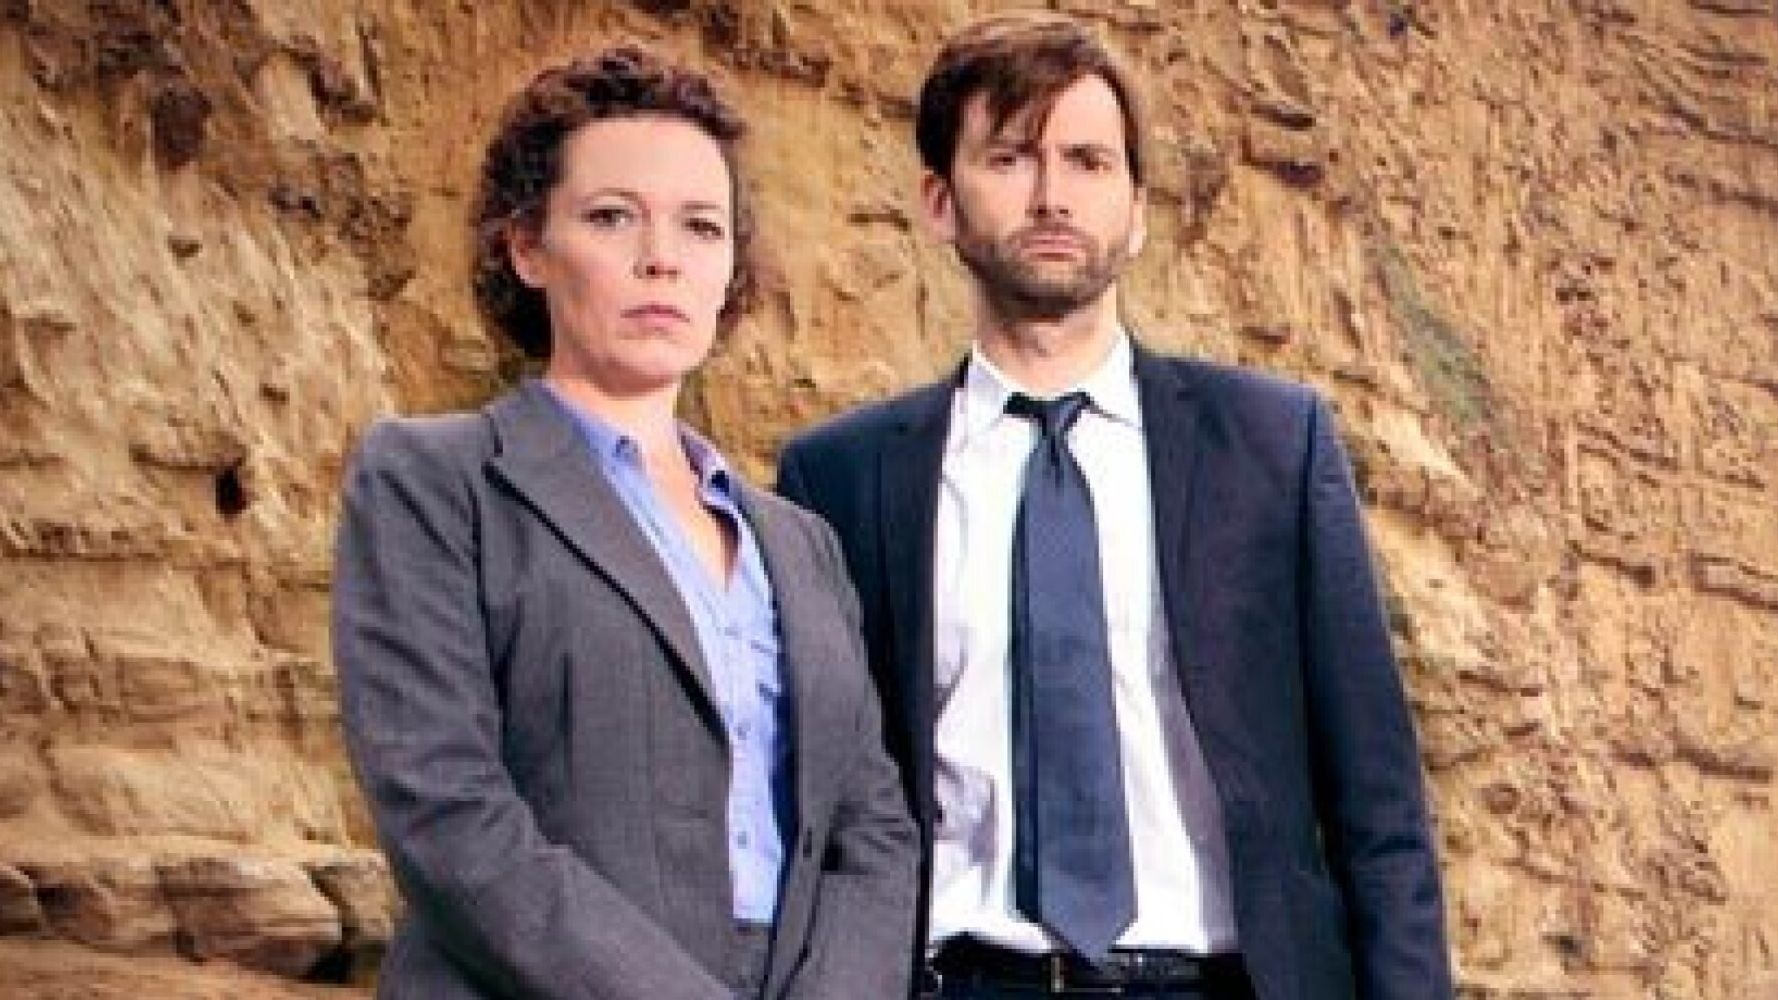 ‘broadchurch Series 2 Catch Up On Series 1 Ahead Of The New Episodes With This 4 Minute Clip